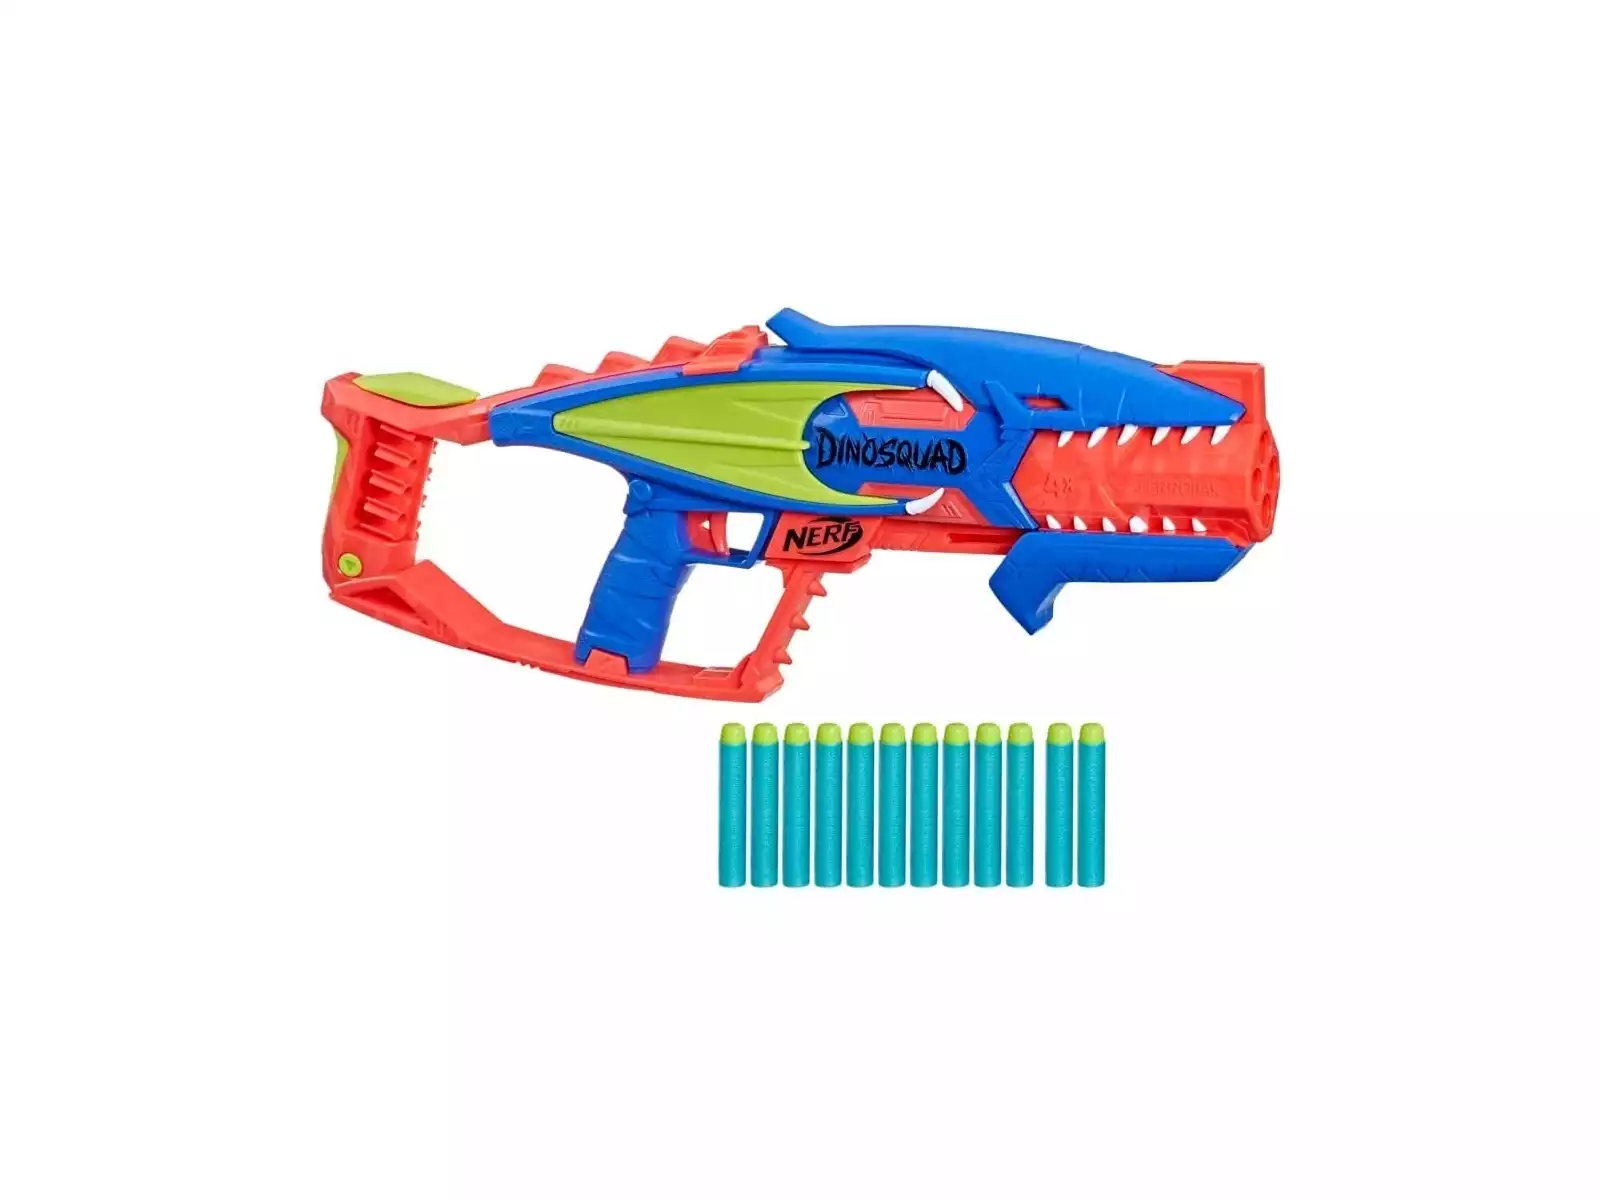 Pistola NERF Fang - Pepco Portugal